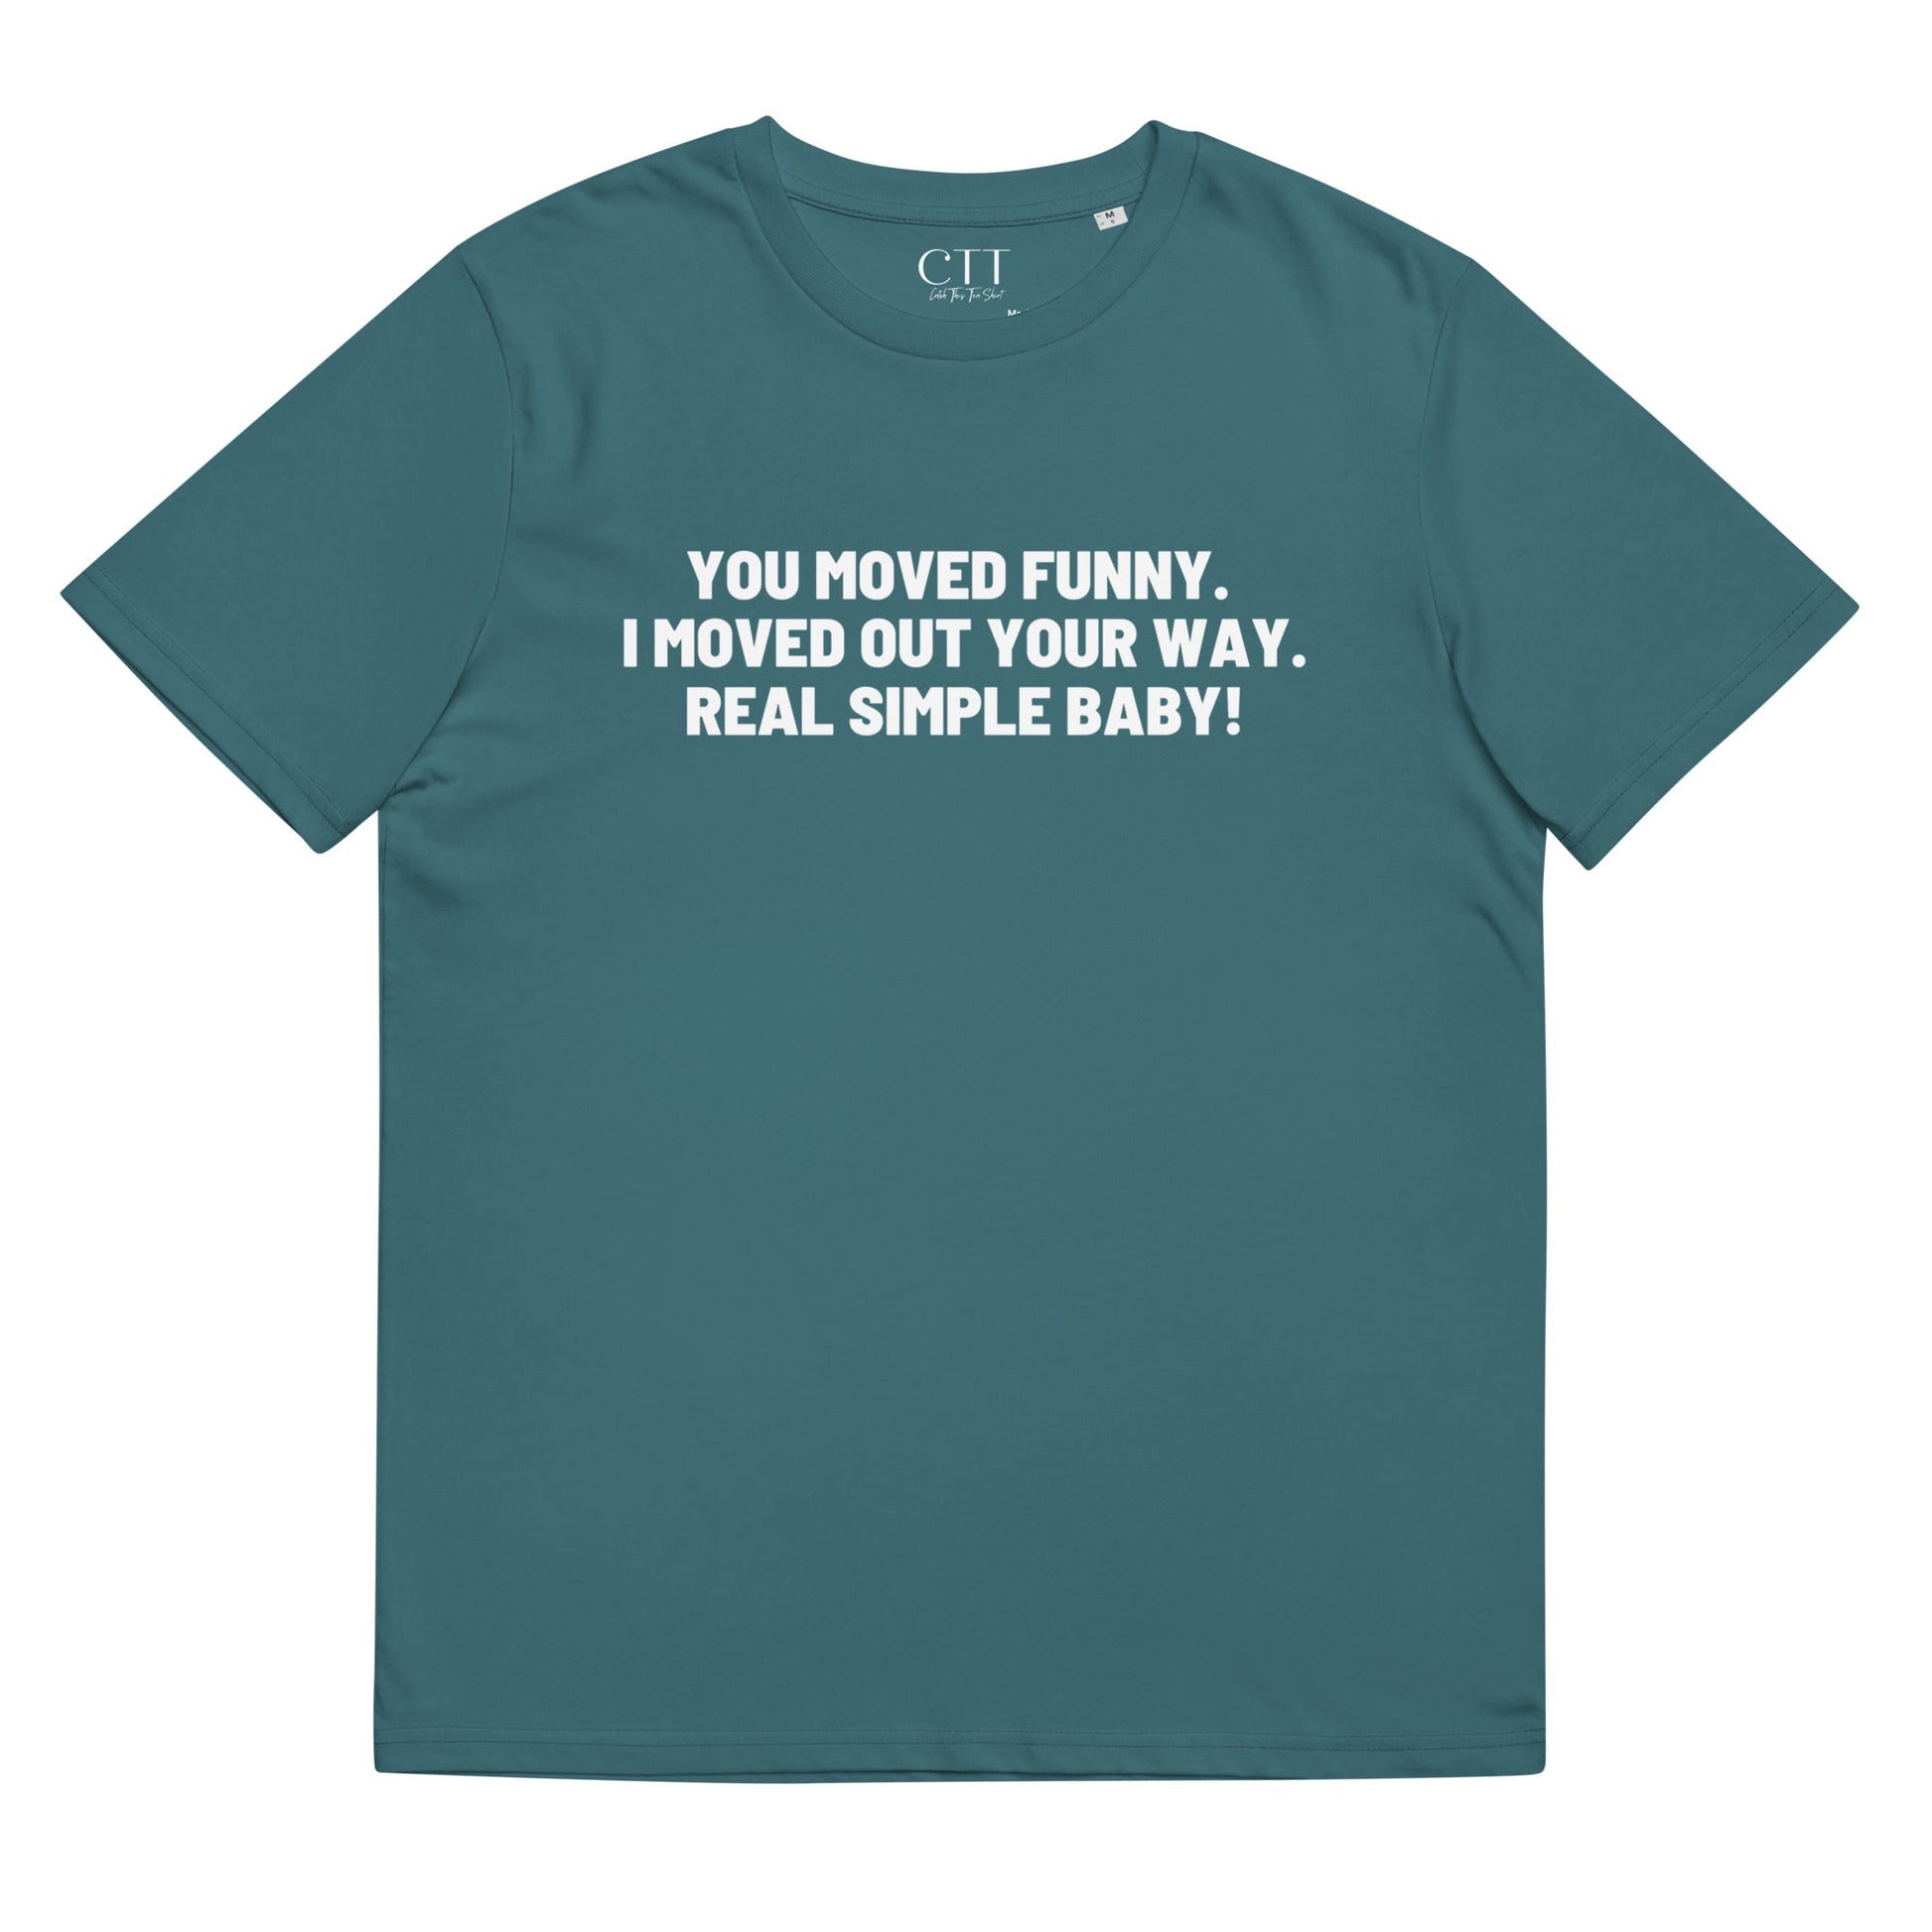 You Moved Funny. I Moved Out Your Way. Real Simple Baby.| Premium Soft Organic Cotton T-shirt | Unisex - Catch This Tea Shirt